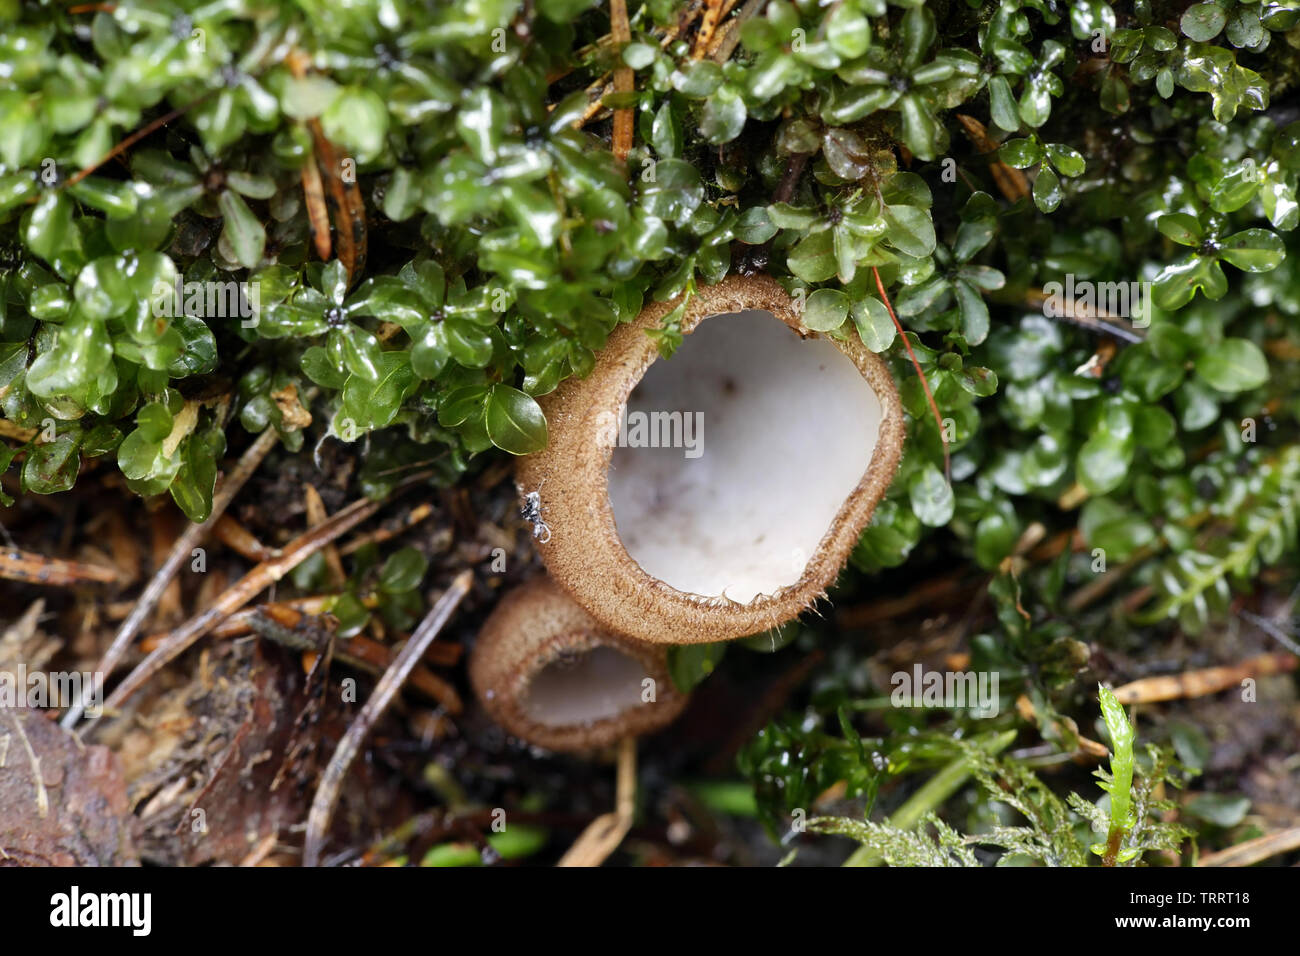 Humaria hemisphaerica, commonly known as the hairy fairy cup or the brown-haired fairy cup Stock Photo